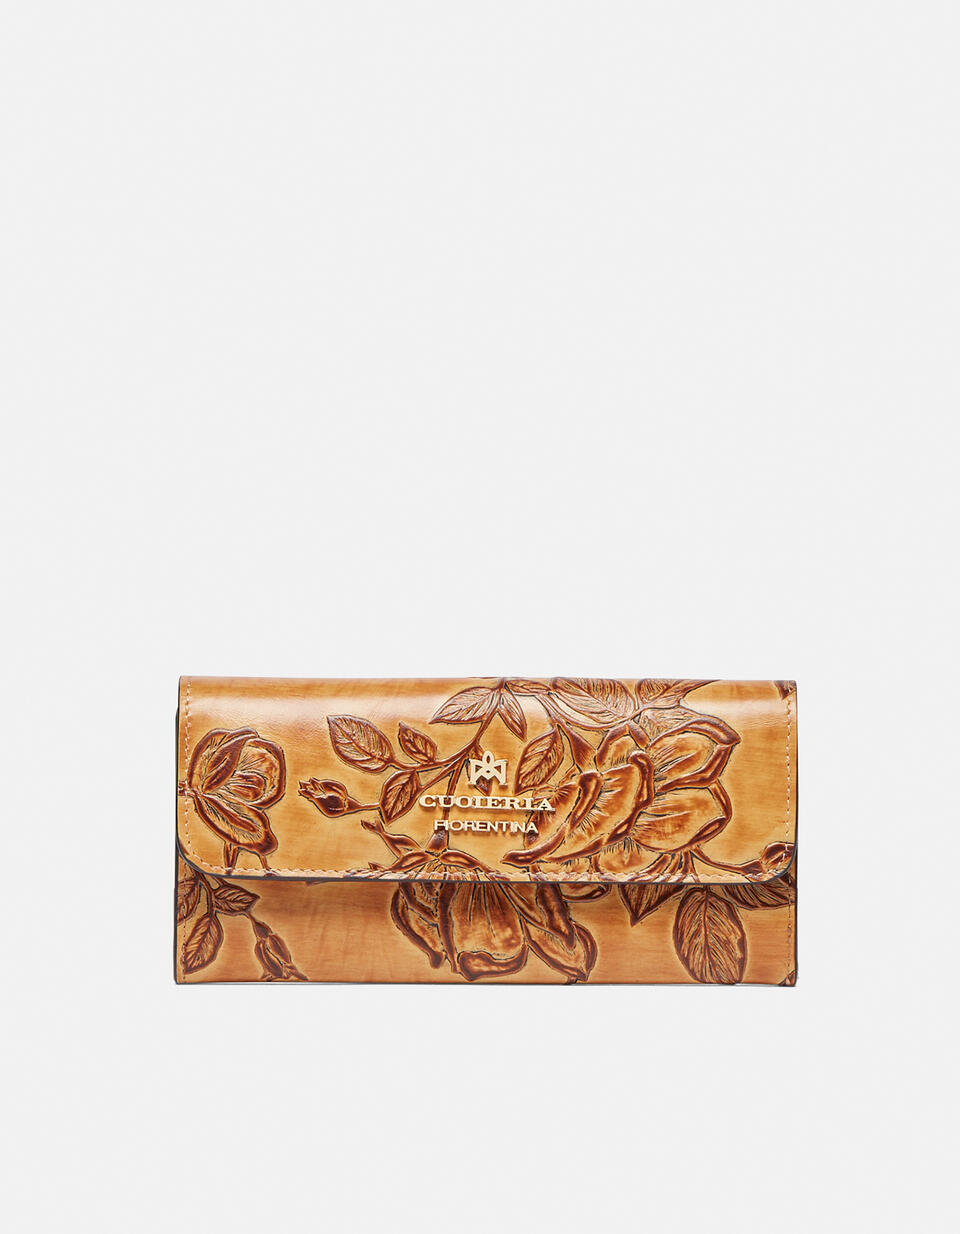 Large bifold wallet in printed leather - Women's Wallets - Women's Wallets | Wallets  - Women's Wallets - Women's Wallets | WalletsCuoieria Fiorentina